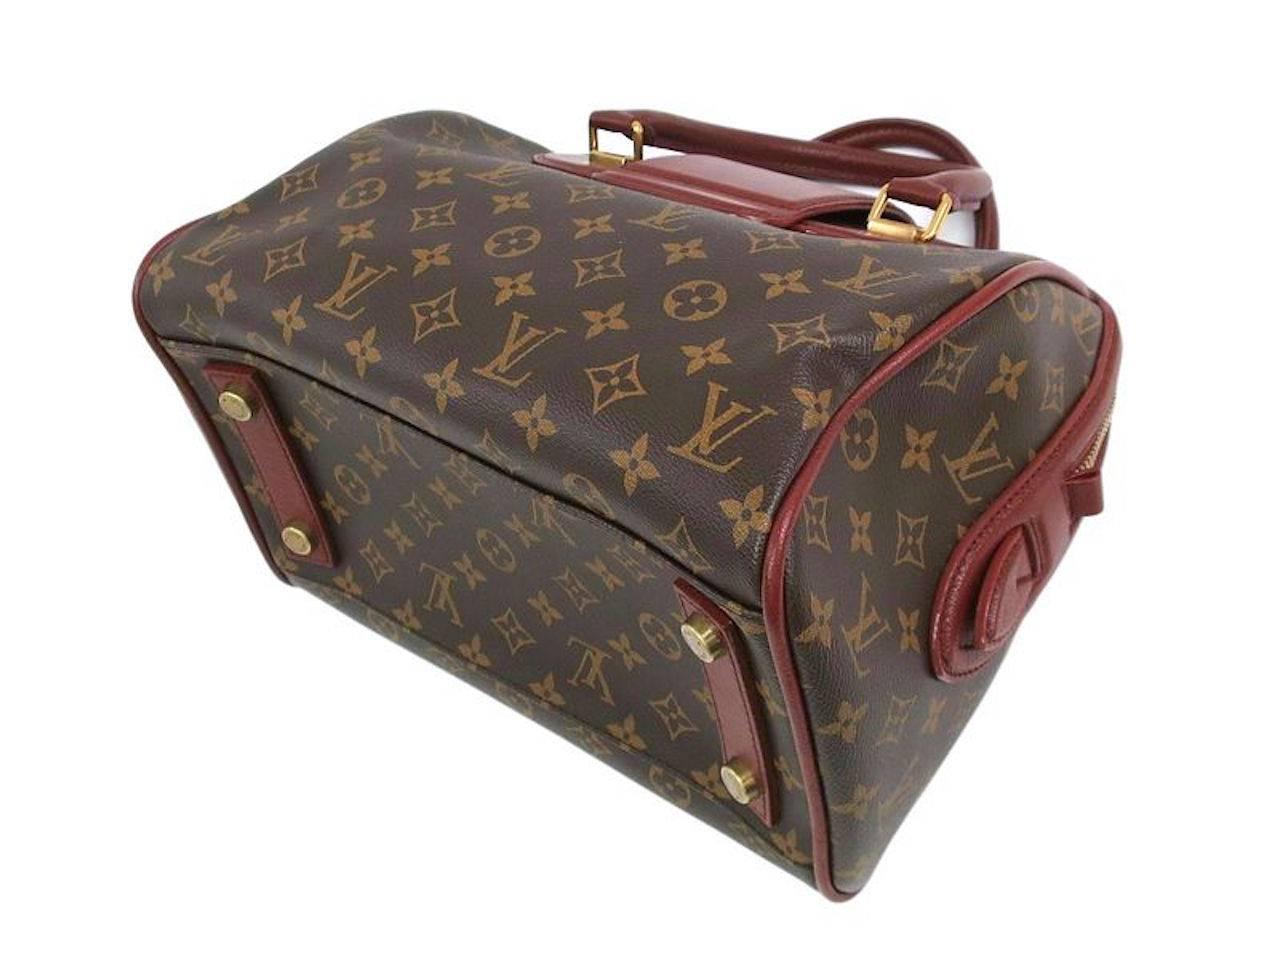 louis vuitton bag with red handles